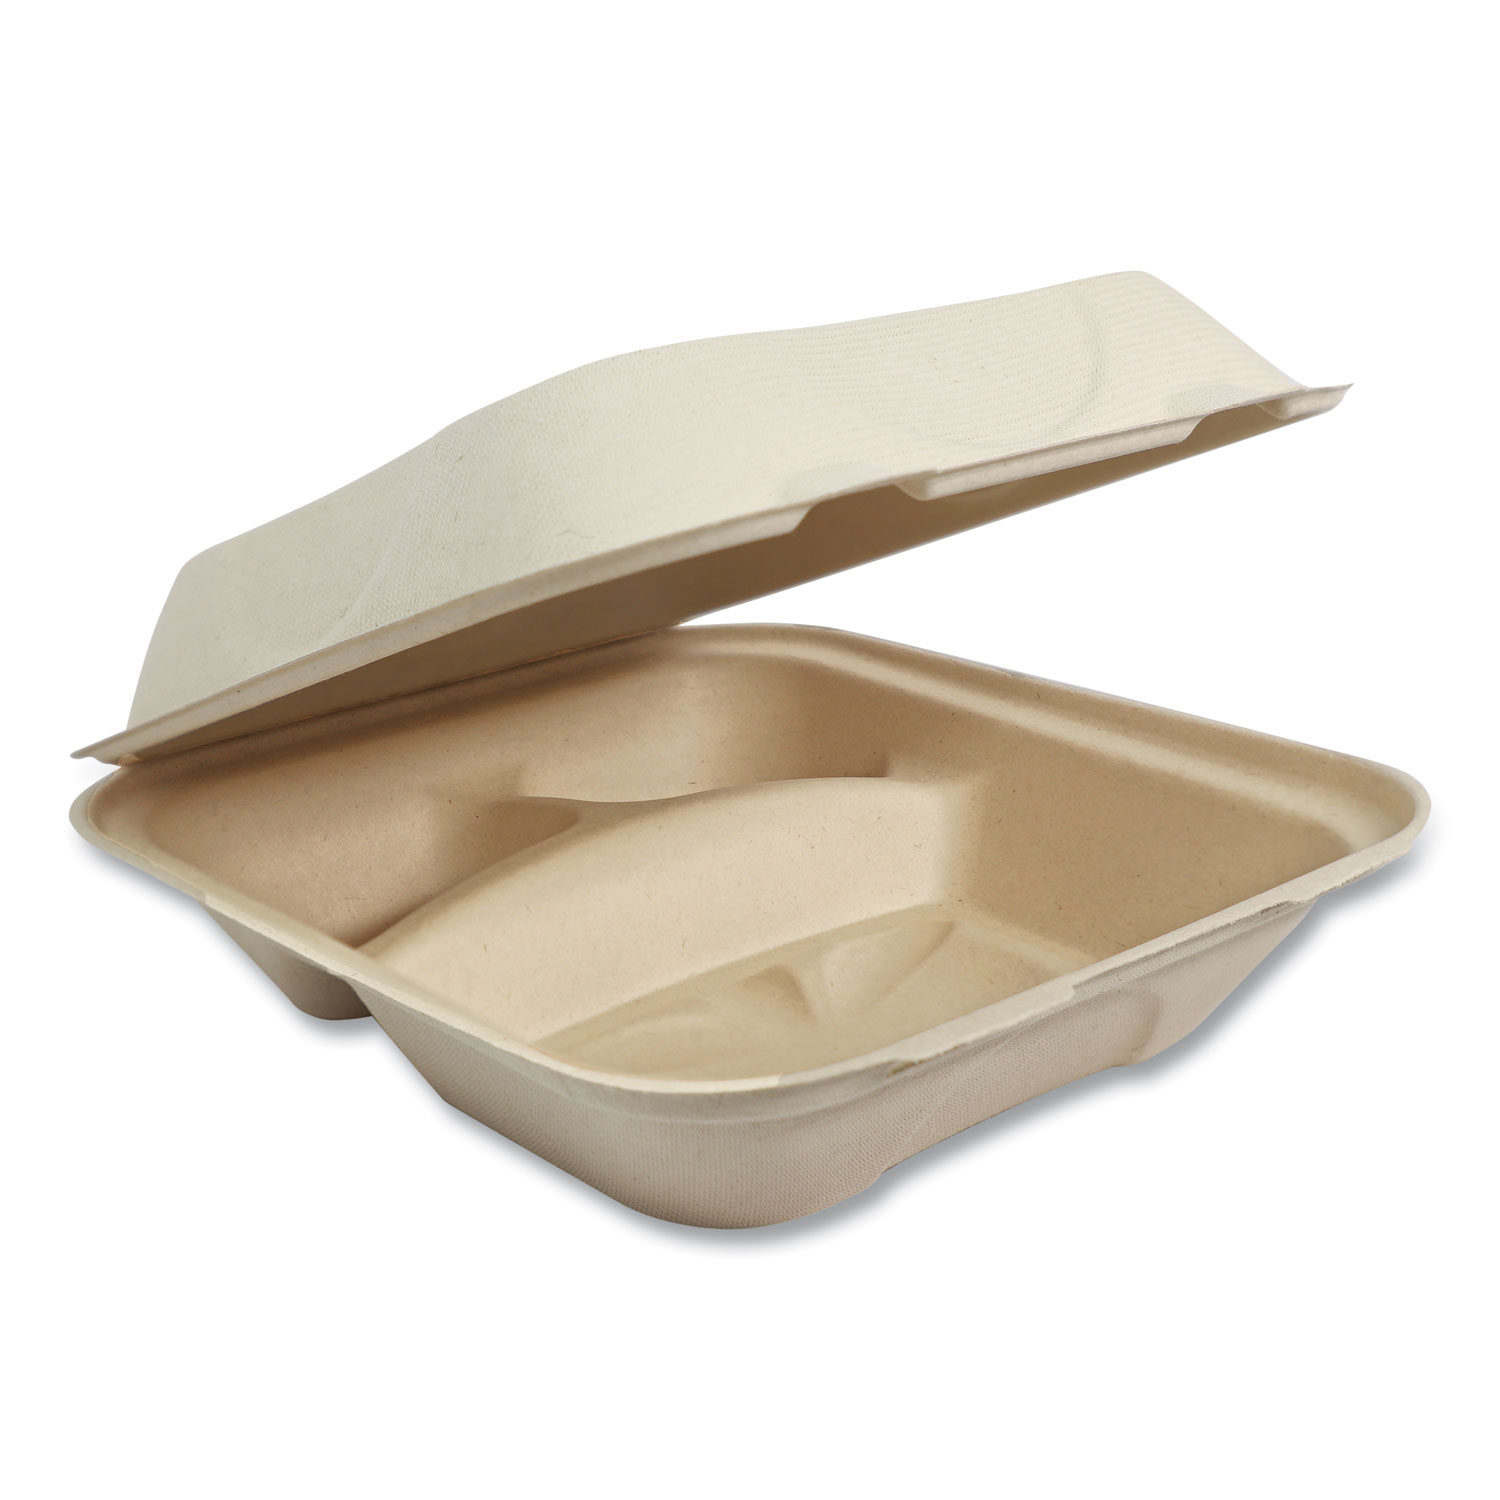 Fiber Hinged Containers, 3-Compartment, 8 x 8 x 3, Natural, Paper